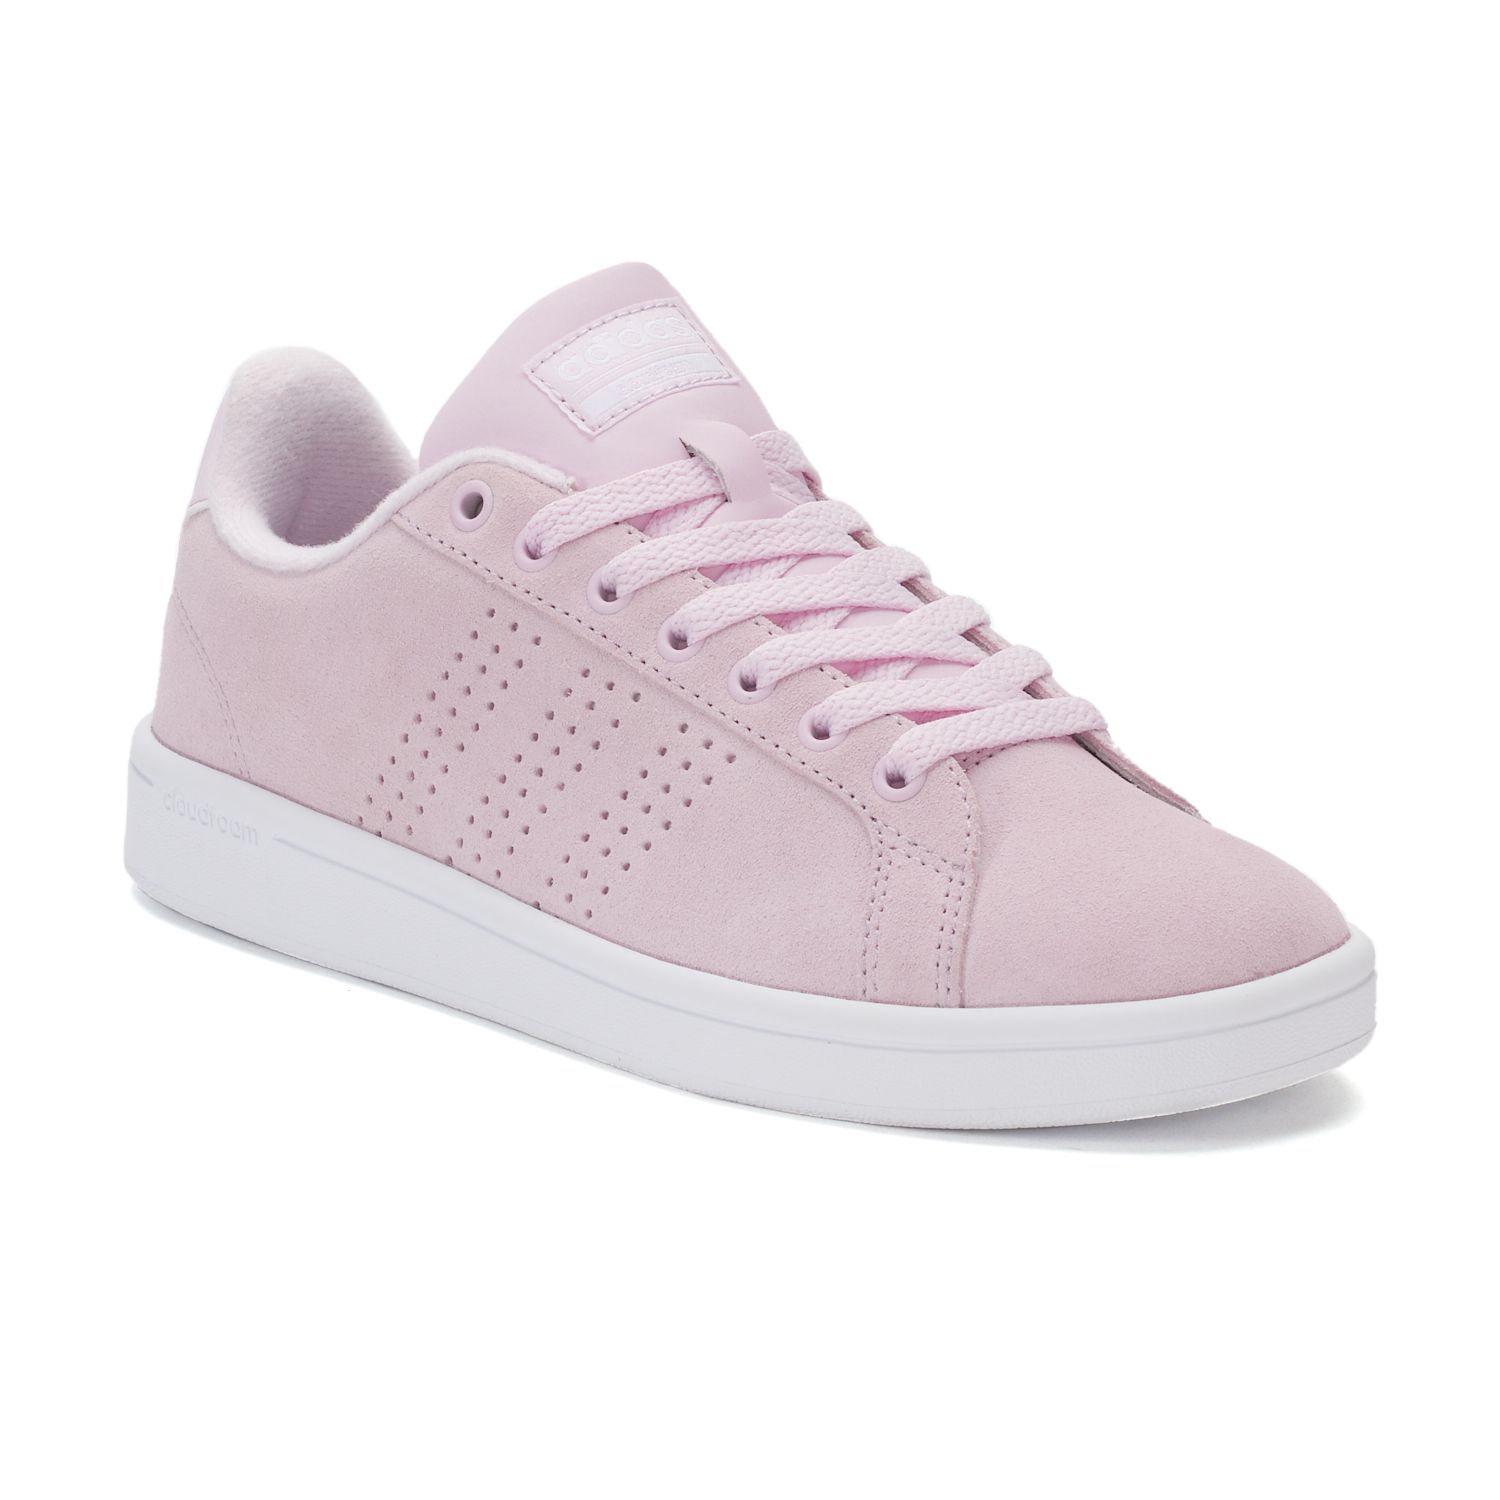 Suede Sneakers, Size: 10, Light Pink 